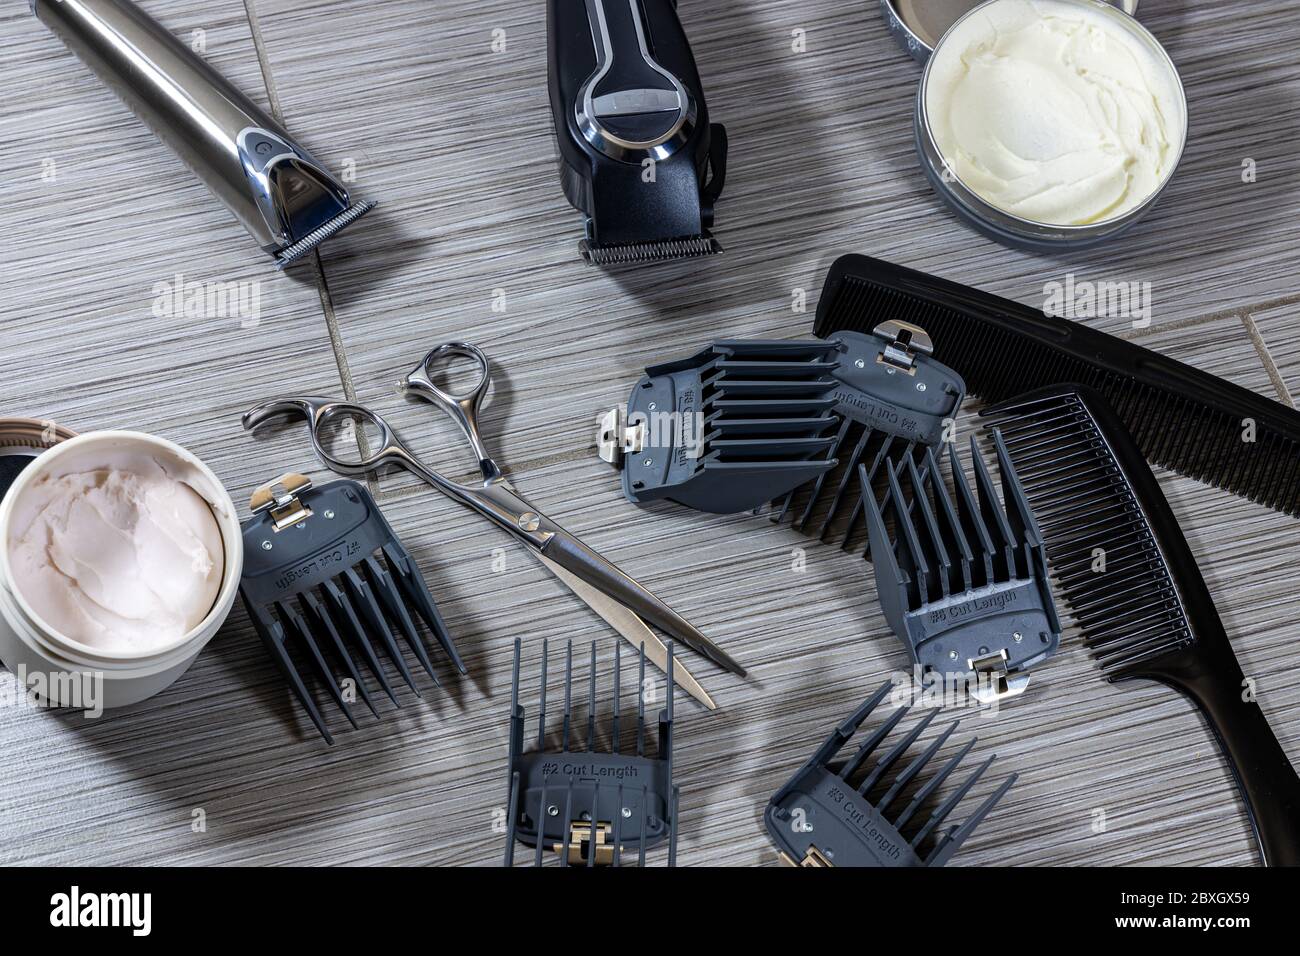 an assortment of tools and equipment used by professional barbers or hair stylists Stock Photo